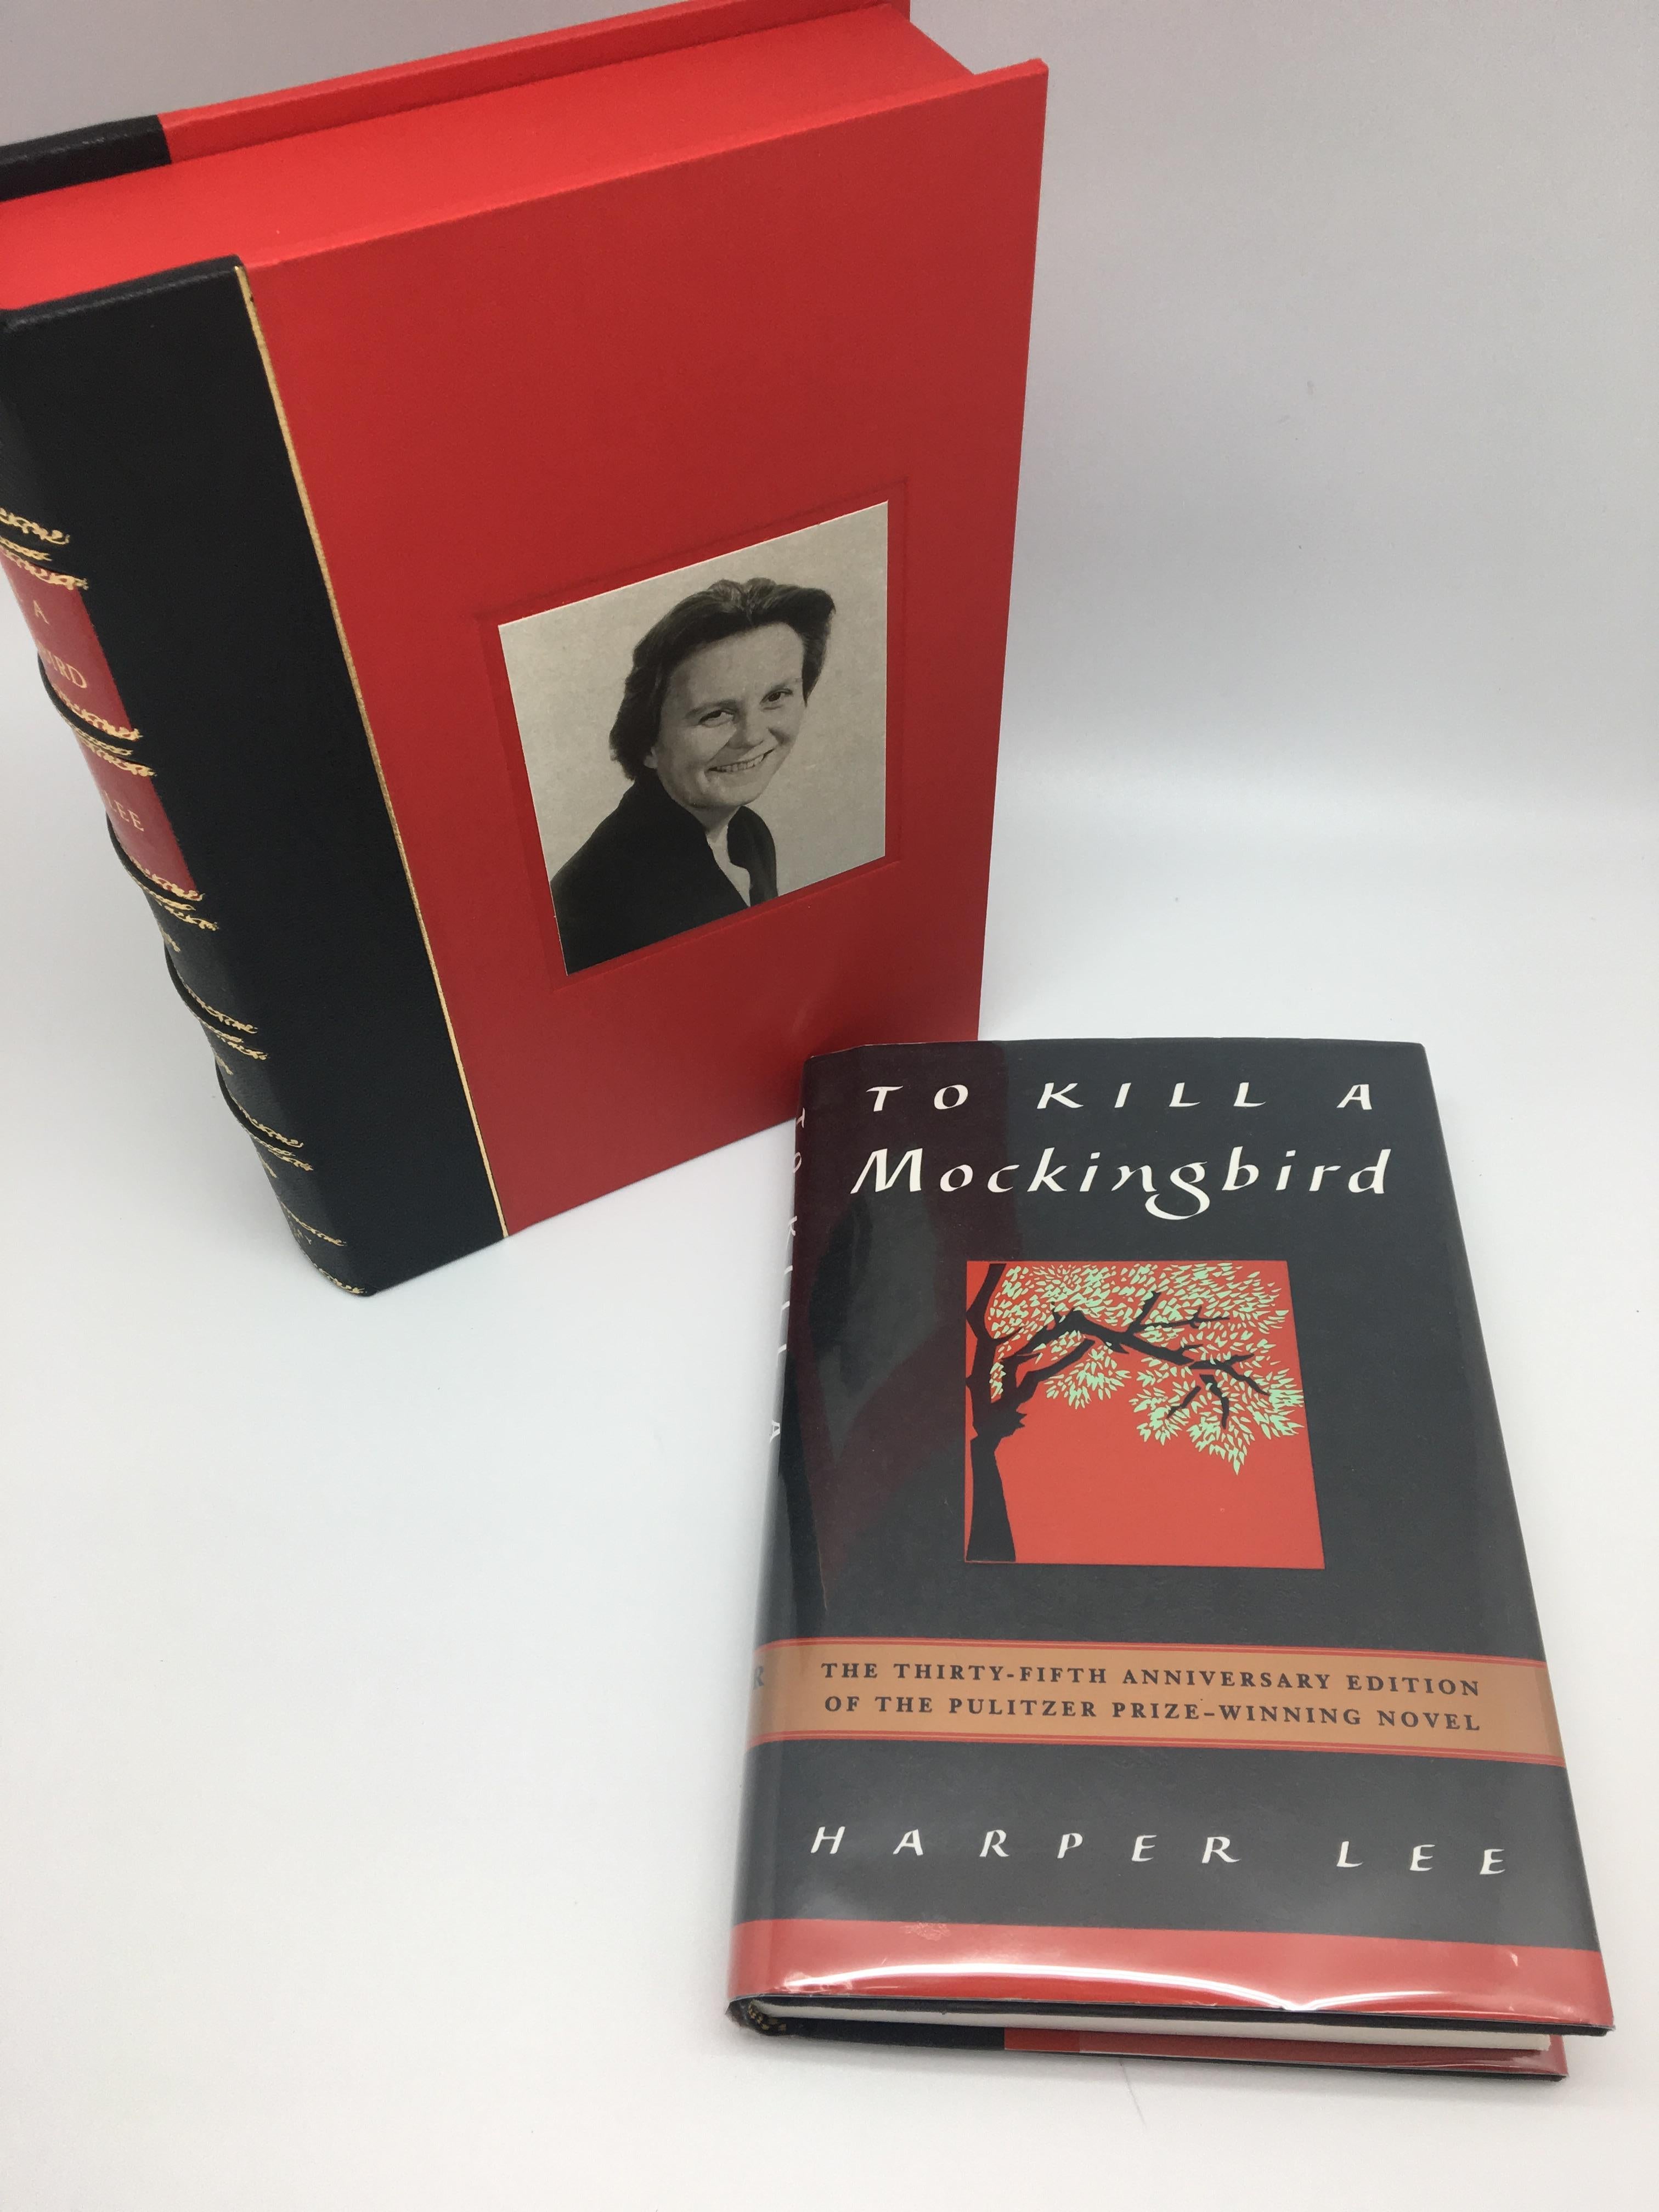 Lee, Harper. “To Kill a Mockingbird”. New York: HarperCollins Publishers Inc., 1995. Signed 35th anniversary hardcover edition. Presented in custom clamshell.

This 35th anniversary edition of To Kill a Mockingbird is signed by Harper Lee on the